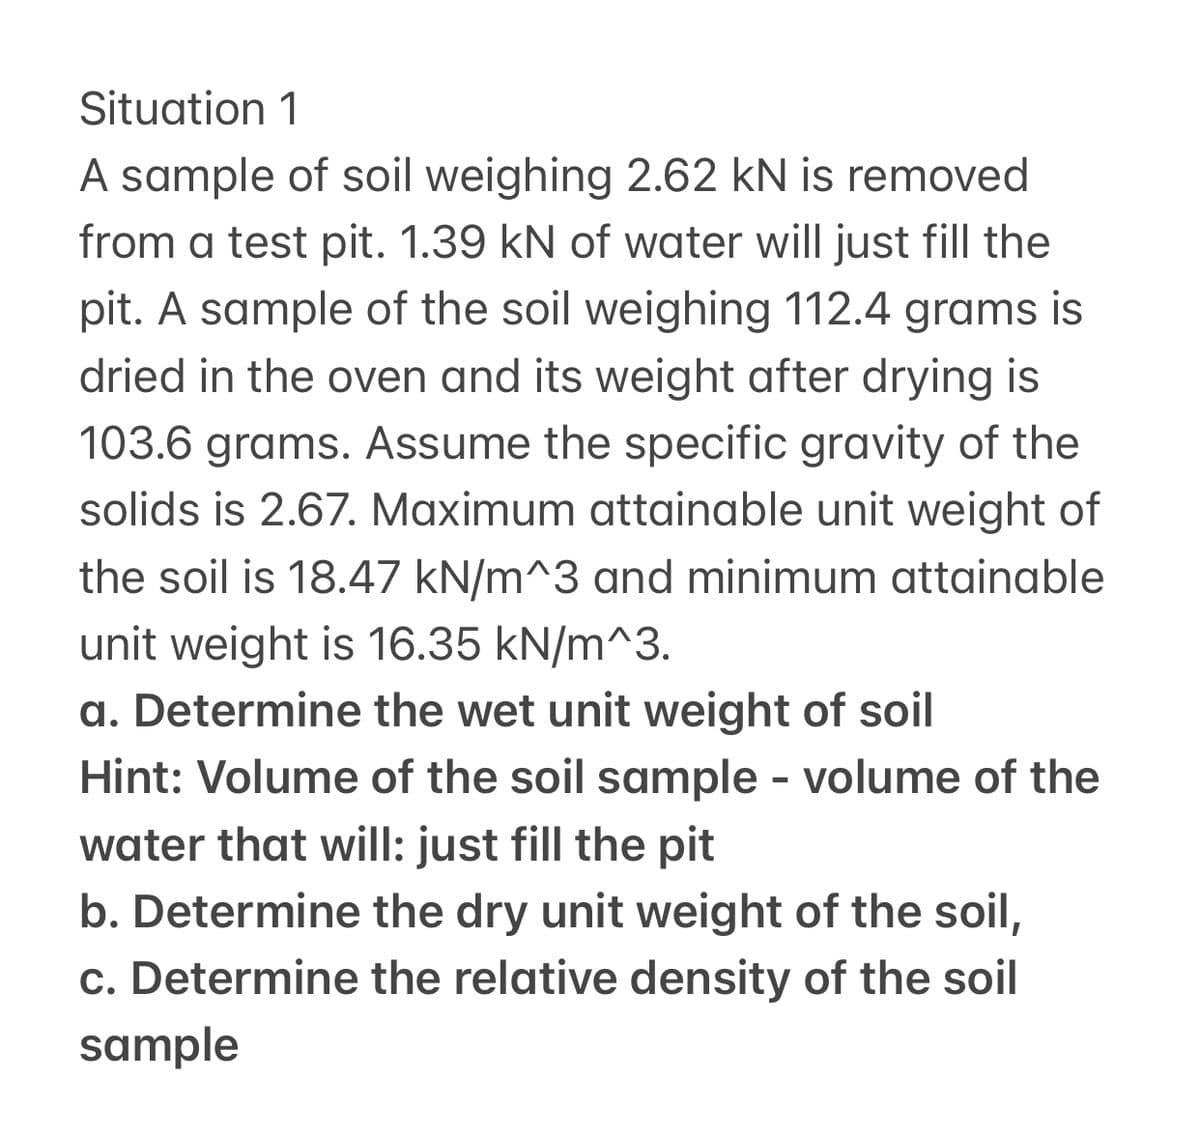 Situation 1
A sample of soil weighing 2.62 kN is removed
from a test pit. 1.39 kN of water will just fill the
pit. A sample of the soil weighing 112.4 grams is
dried in the oven and its weight after drying is
103.6 grams. Assume the specific gravity of the
solids is 2.67. Maximum attainable unit weight of
the soil is 18.47 kN/m^3 and minimum attainable
unit weight is 16.35 kN/m^3.
a. Determine the wet unit weight of soil
Hint: Volume of the soil sample - volume of the
water that will: just fill the pit
b. Determine the dry unit weight of the soil,
c. Determine the relative density of the soil
sample